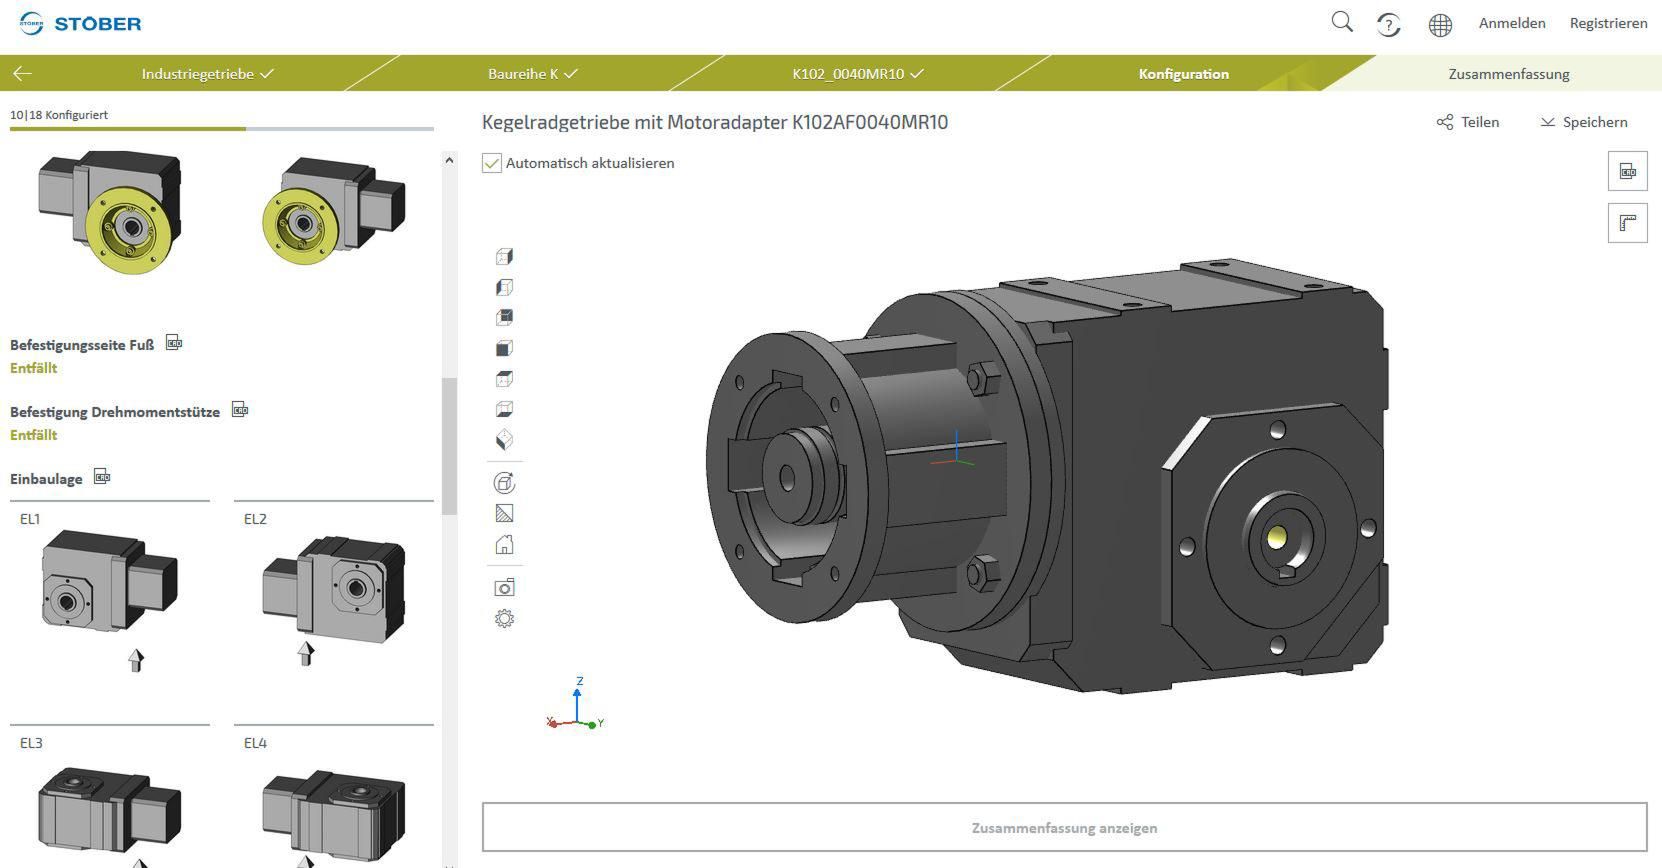 Online Configurator Tool allows design engineers to create their own drive specifications quickly and easily